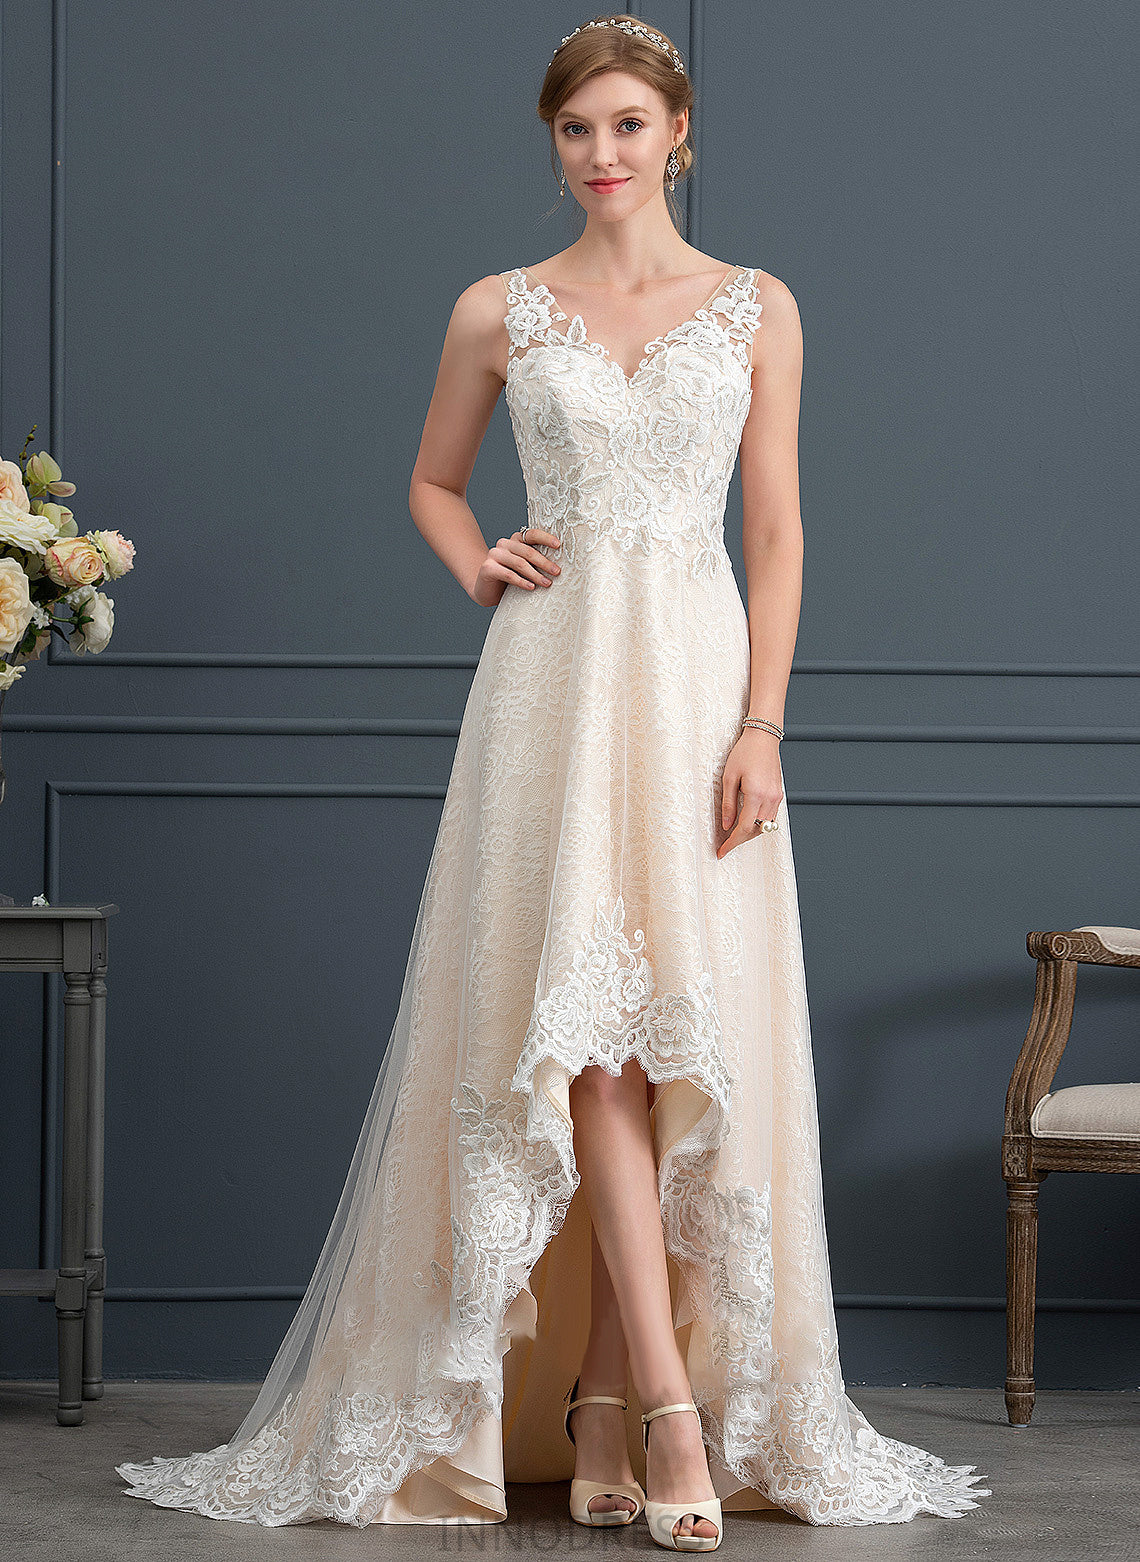 Dress With Asymmetrical Wedding Dresses Lace Wedding A-Line Maeve Tulle V-neck